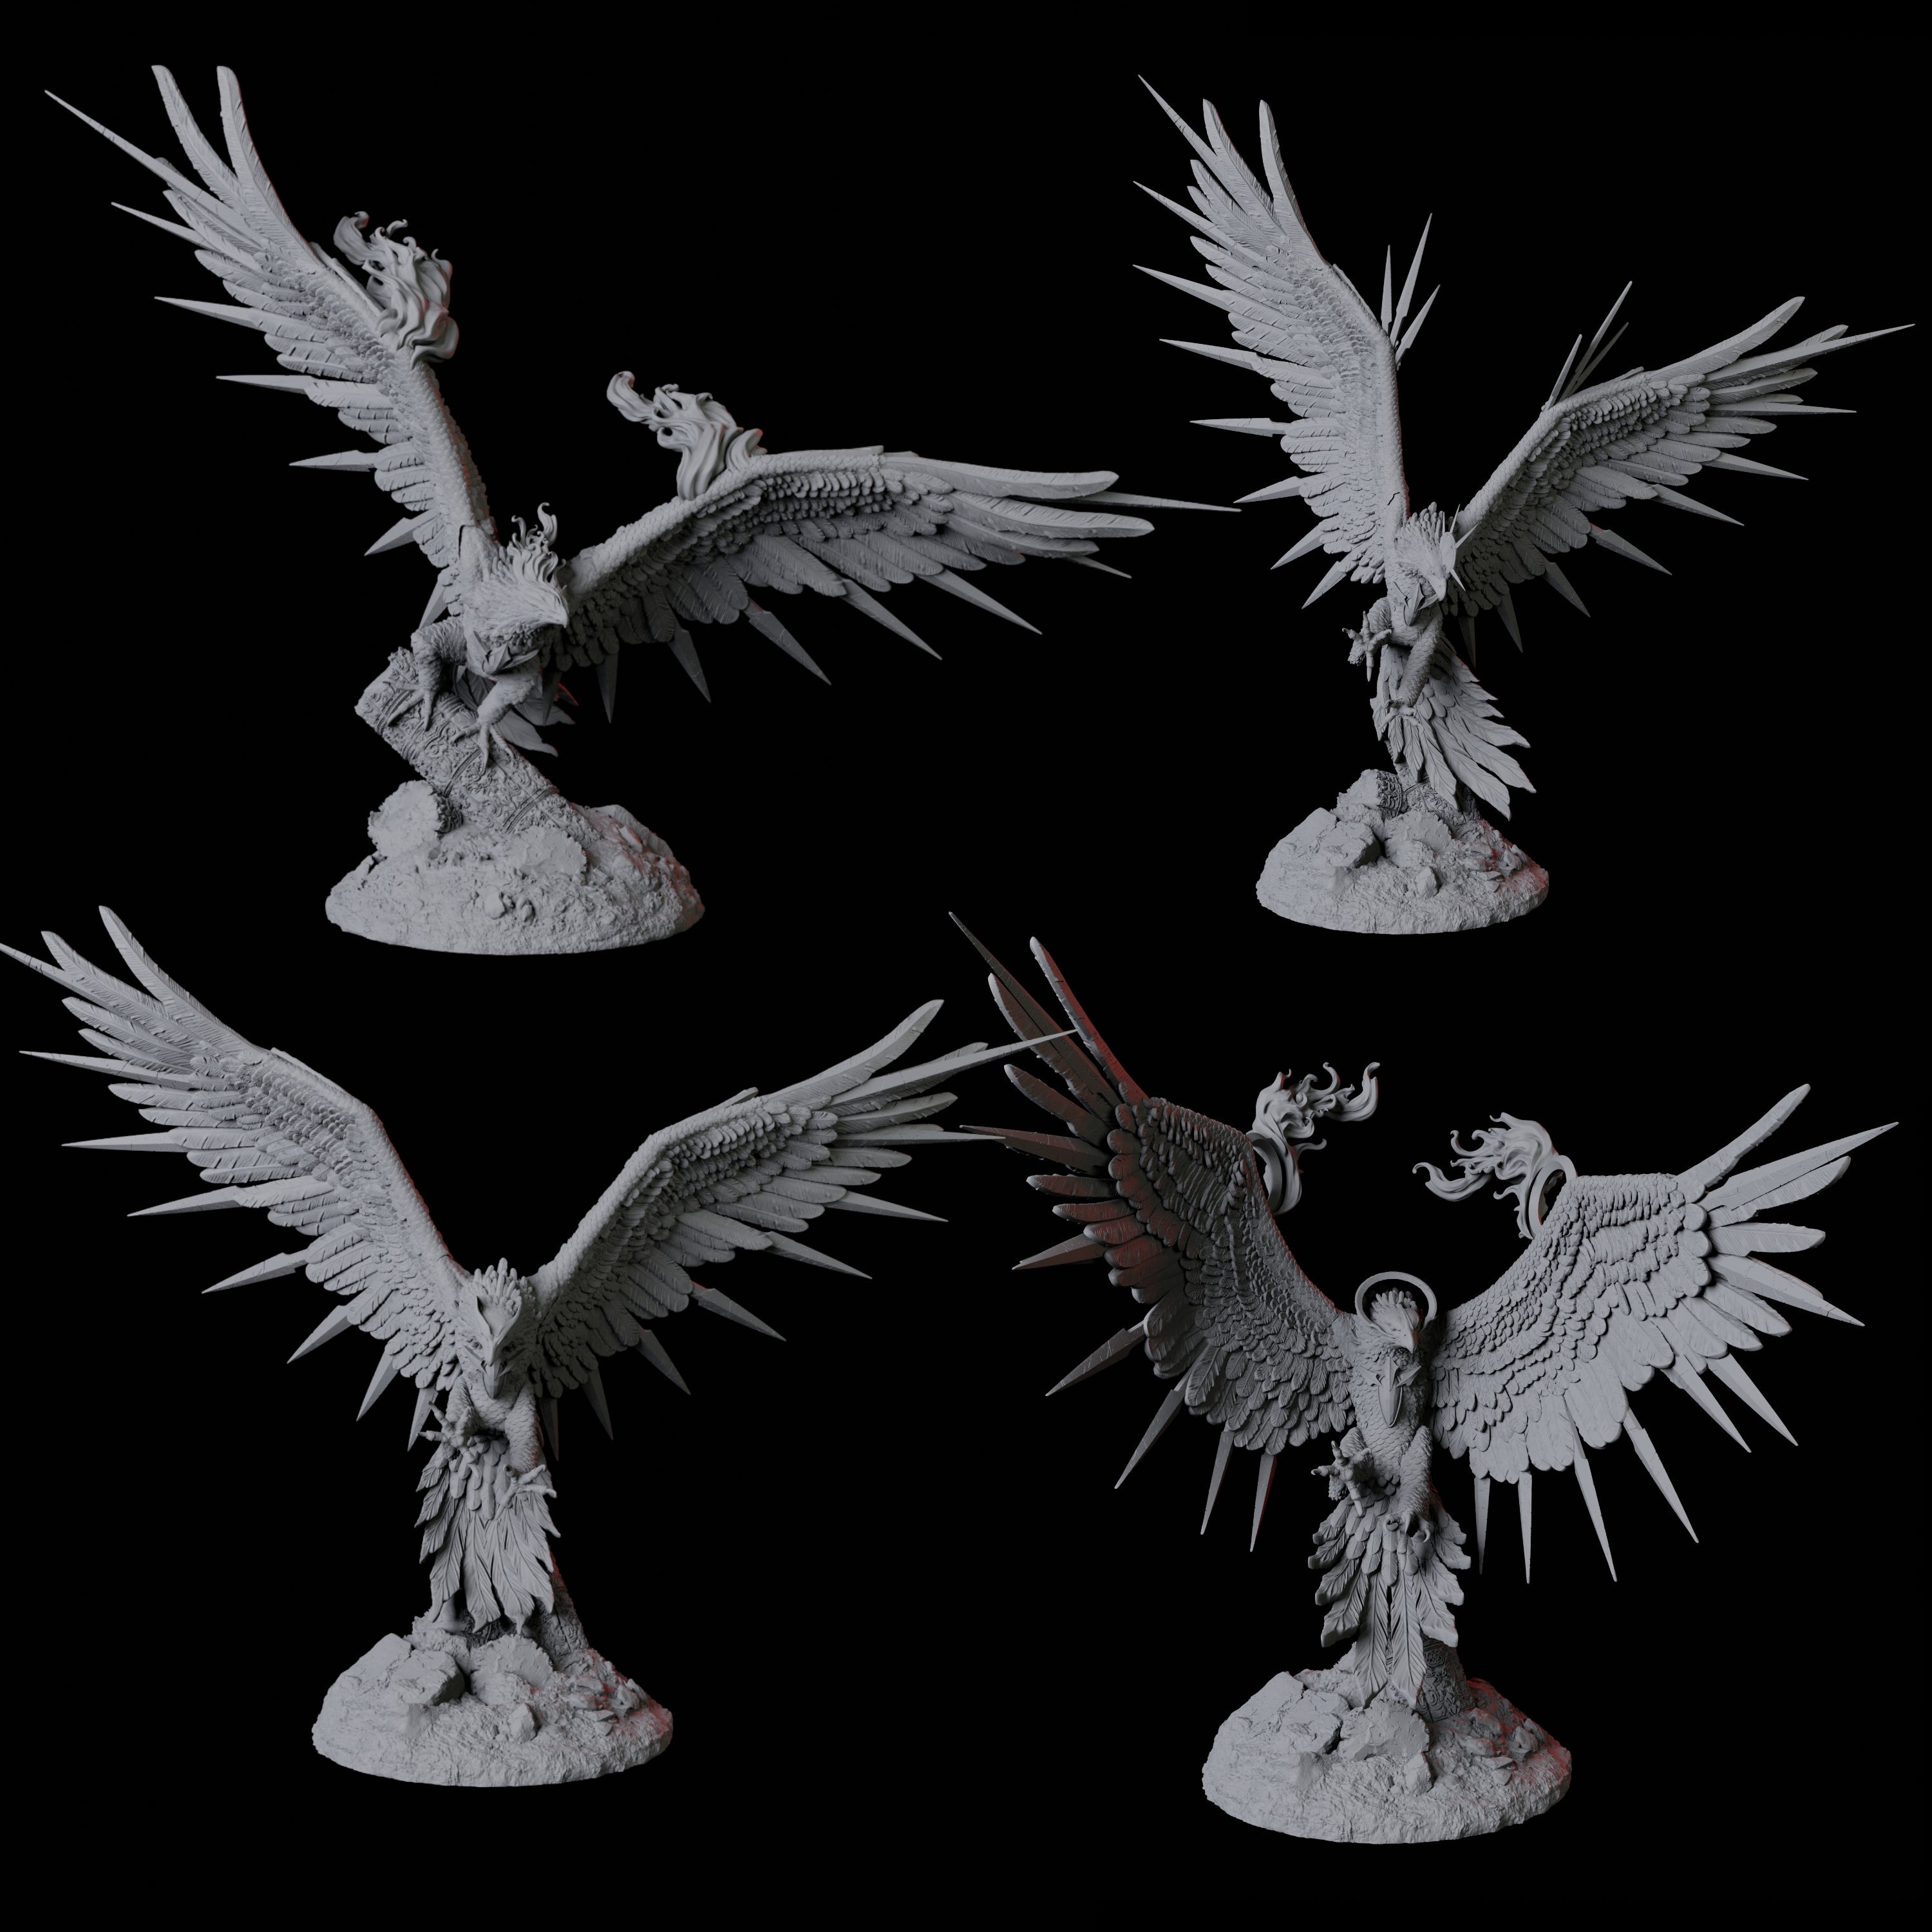 Four Fiery Phoenix Miniature for Dungeons and Dragons, Pathfinder or other TTRPGs